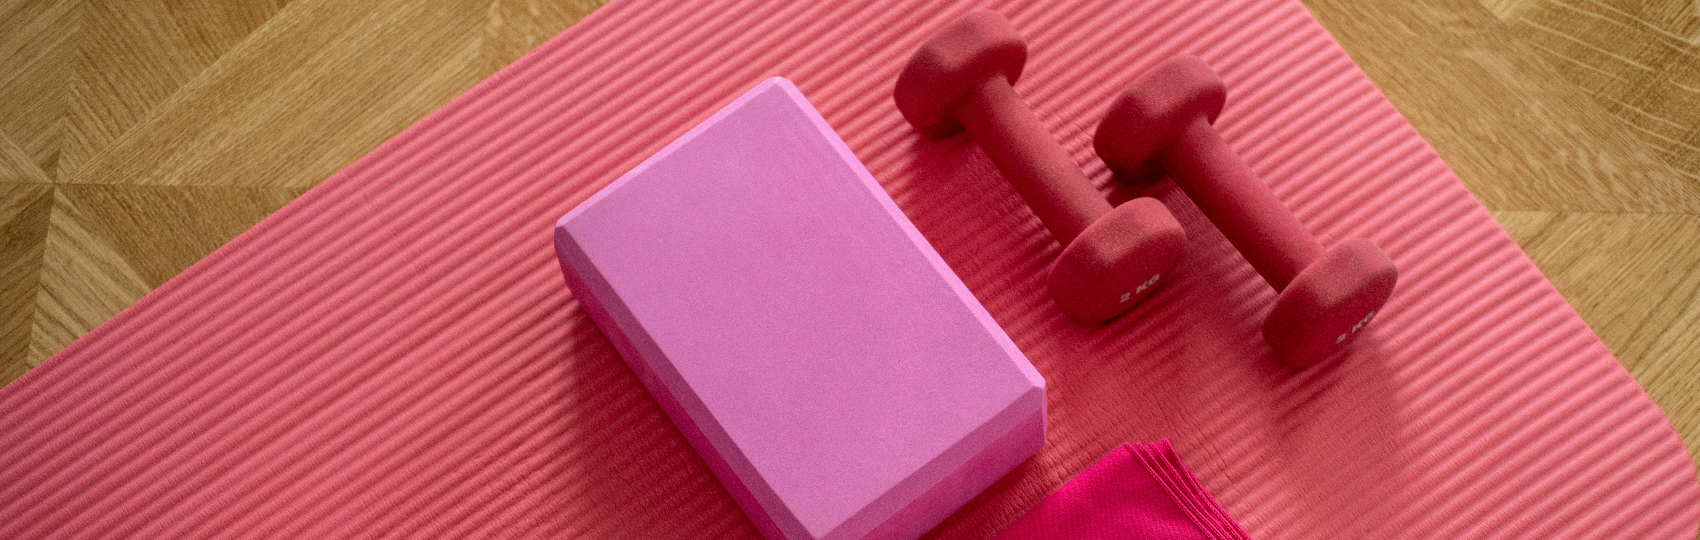 Opening A Yoga Studio? Here's The Essential Equipment